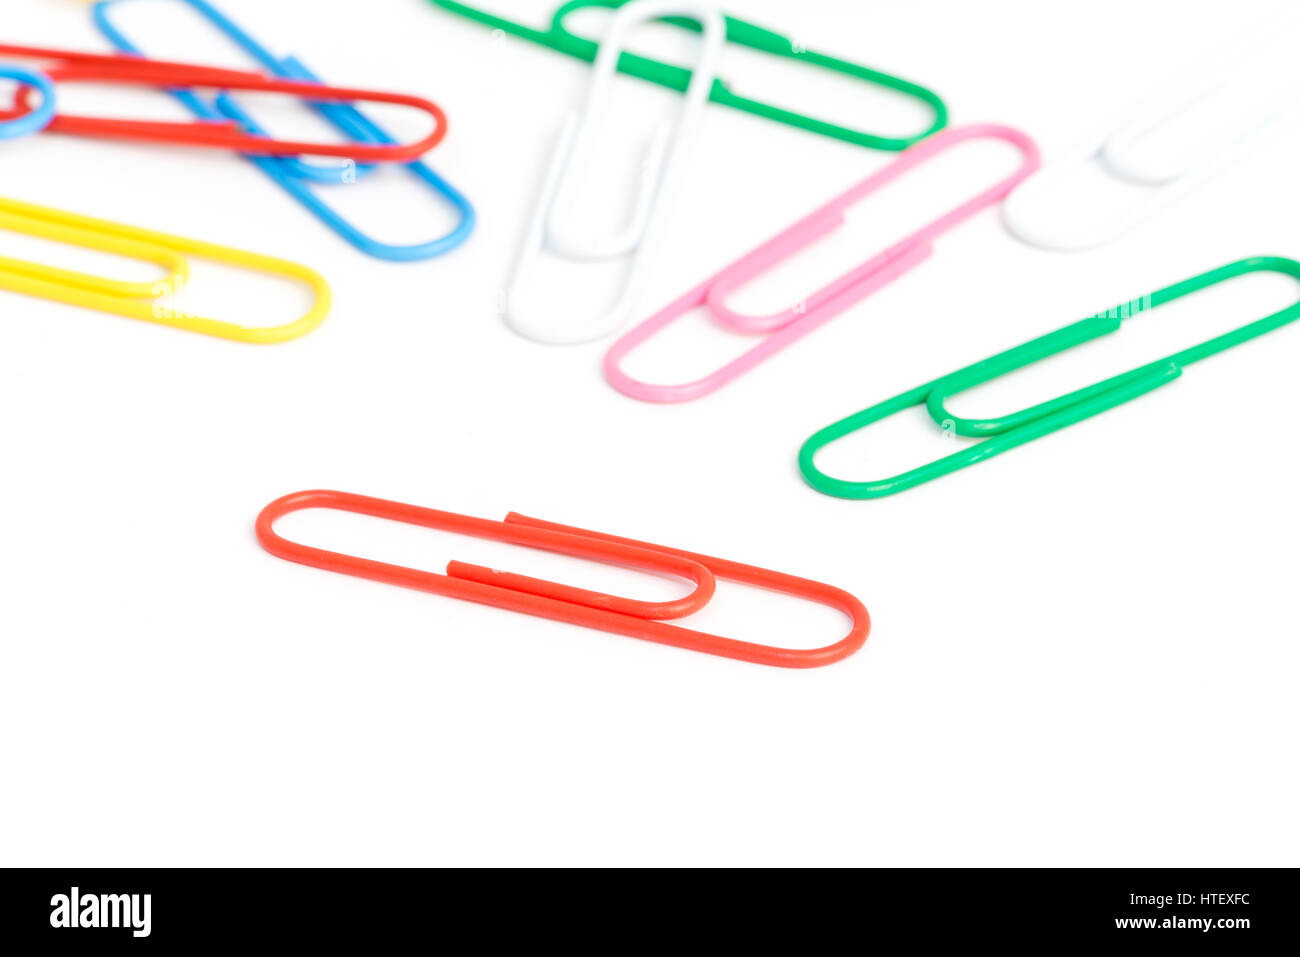 Paper clips.  Random jumble of assorted plastic covered paper clips on white background Stock Photo